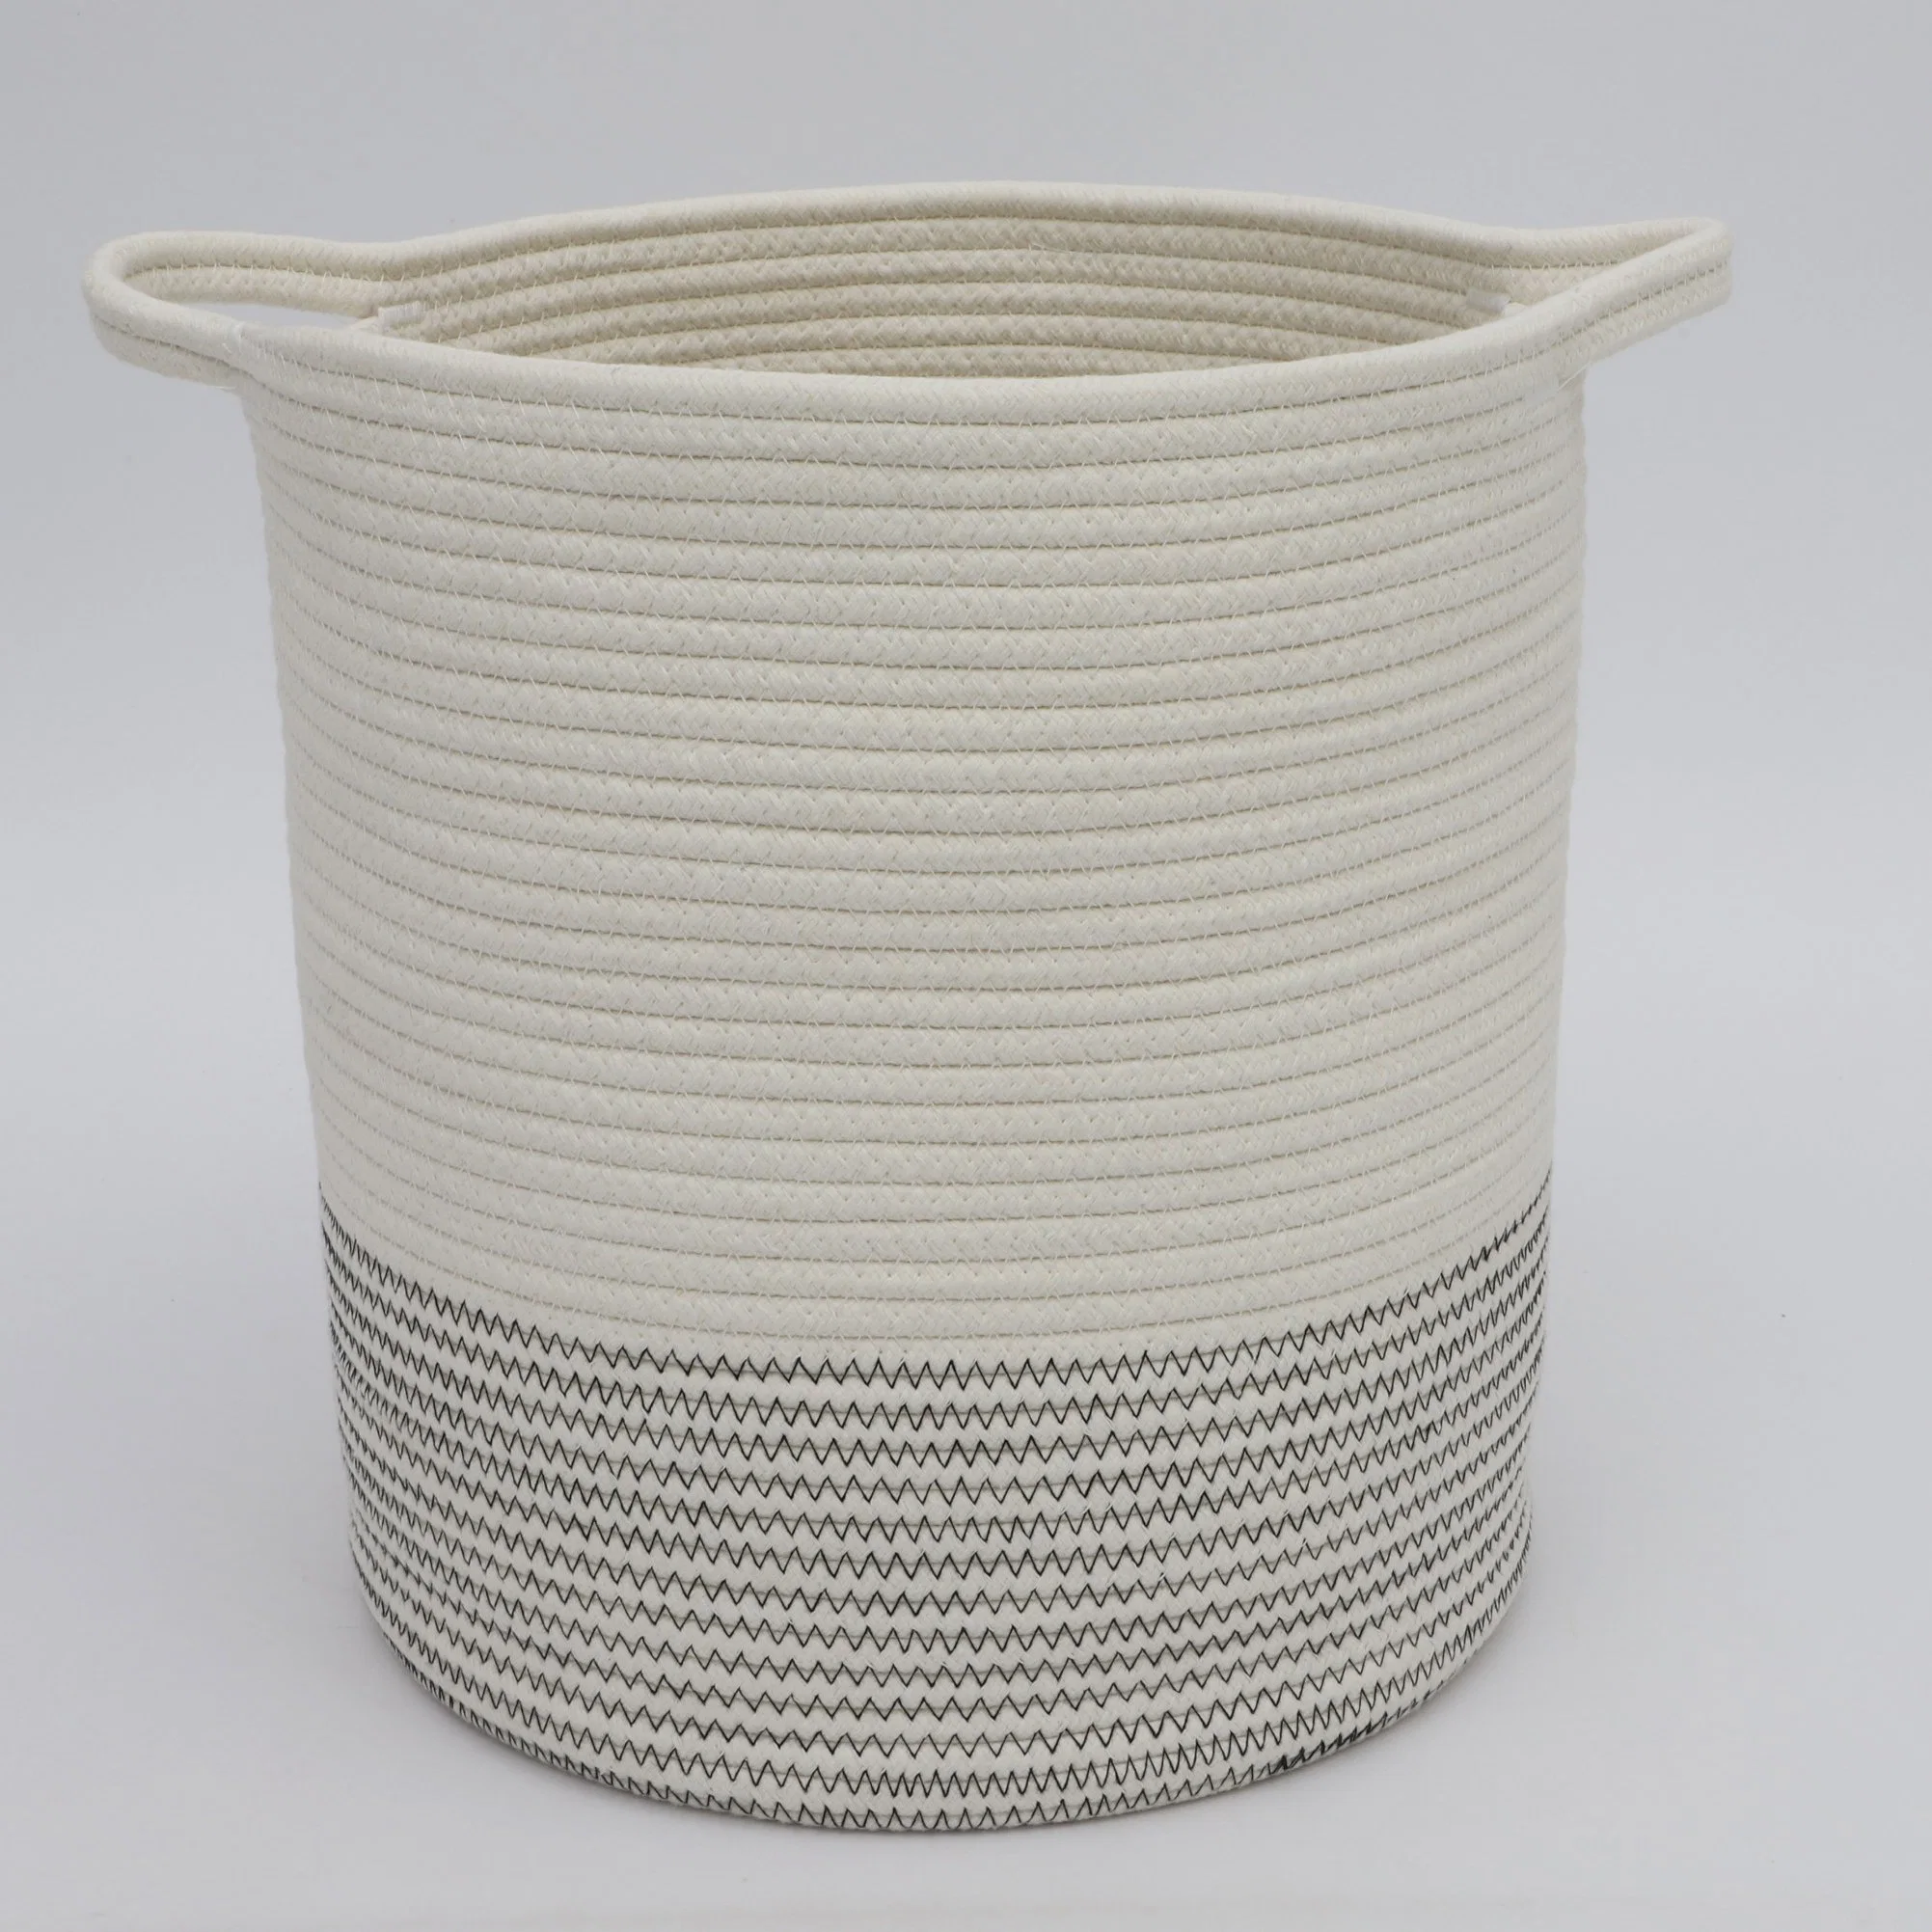 High quality/High cost performance Extra Large Customized Multi Functional Environmental Laundry Storage Cotton Rope Weaving Gift Basket